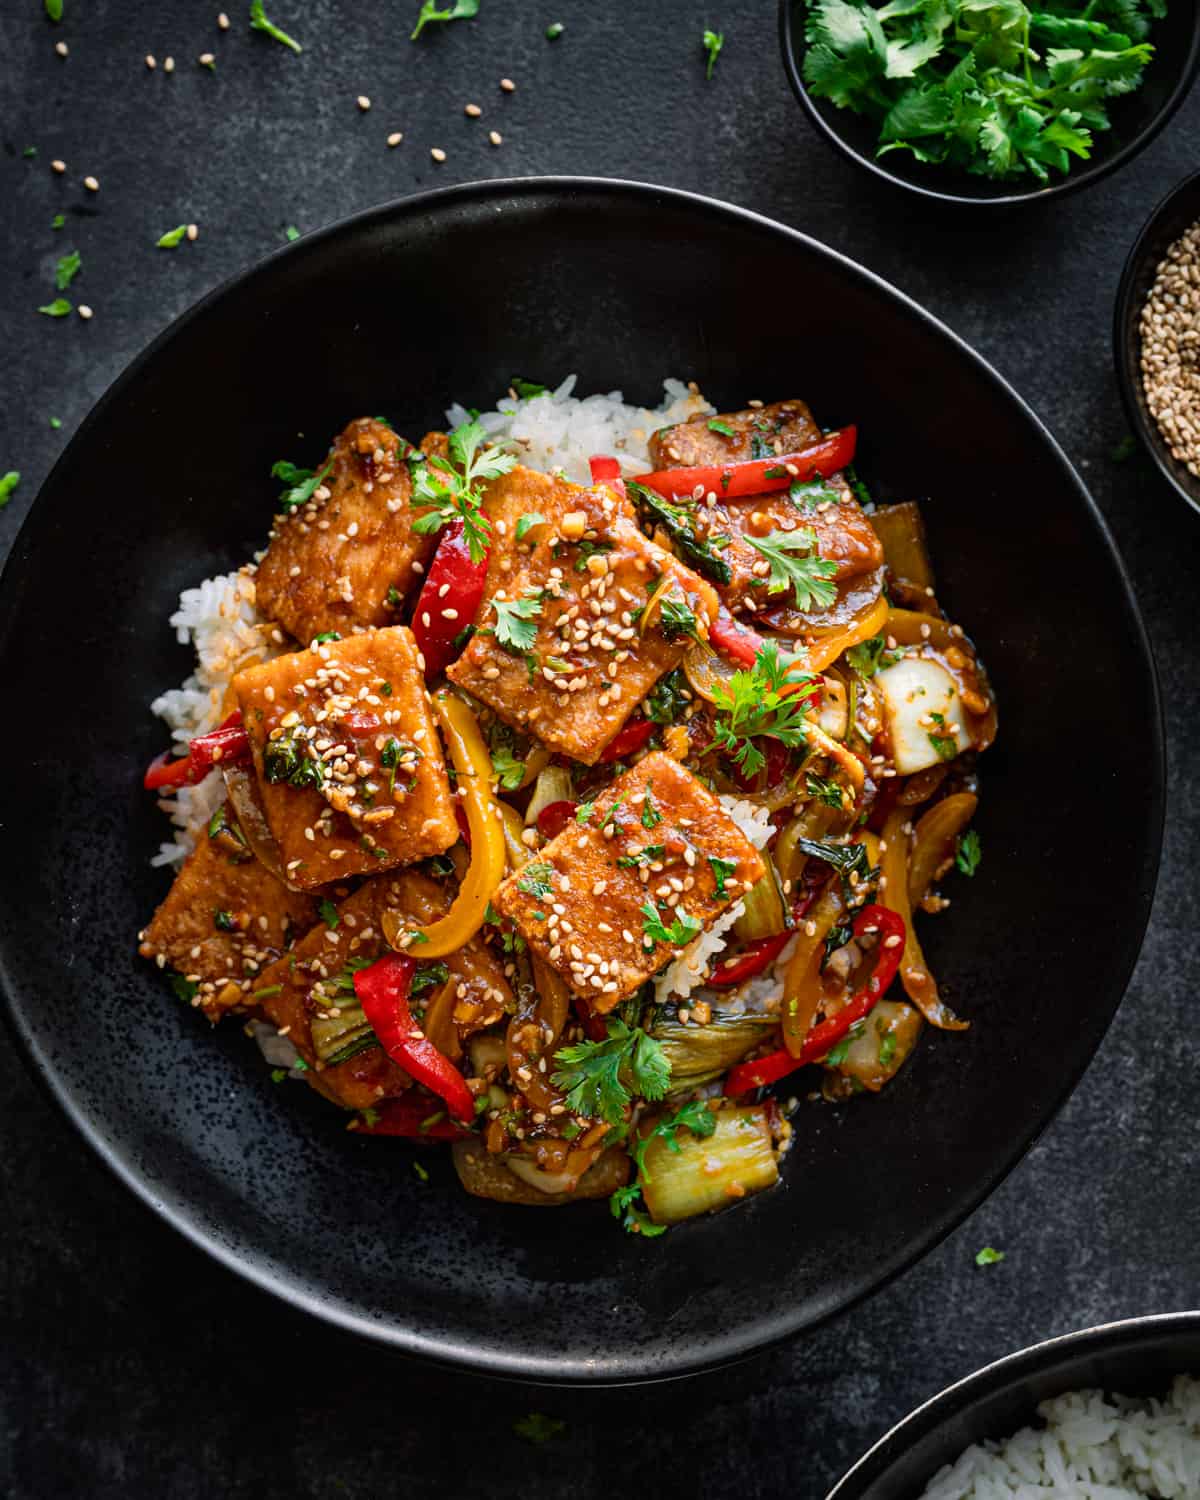 Tofu and pepper stir fry on a bed of white rice in a black bowl.